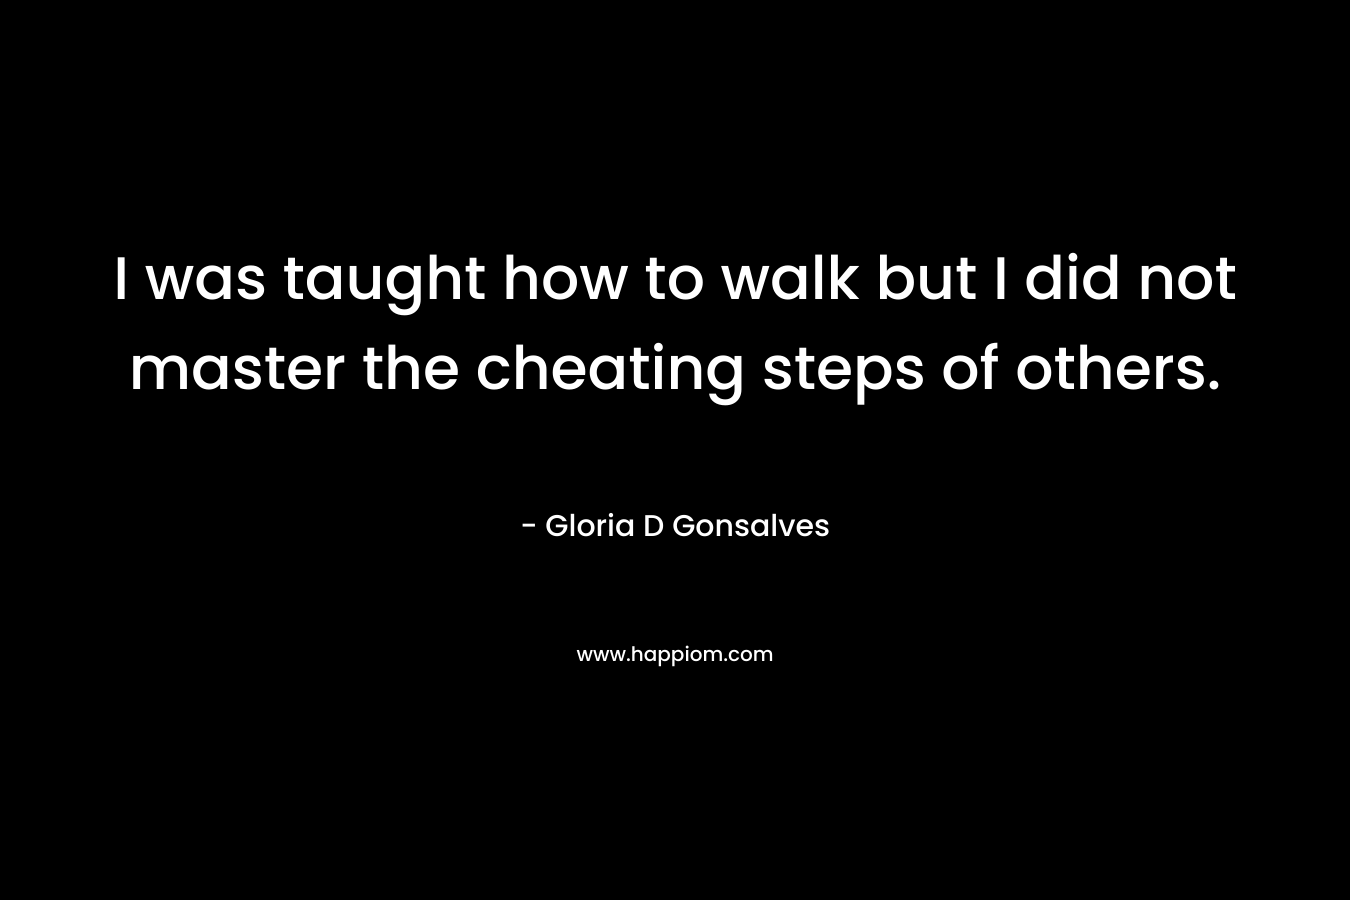 I was taught how to walk but I did not master the cheating steps of others.